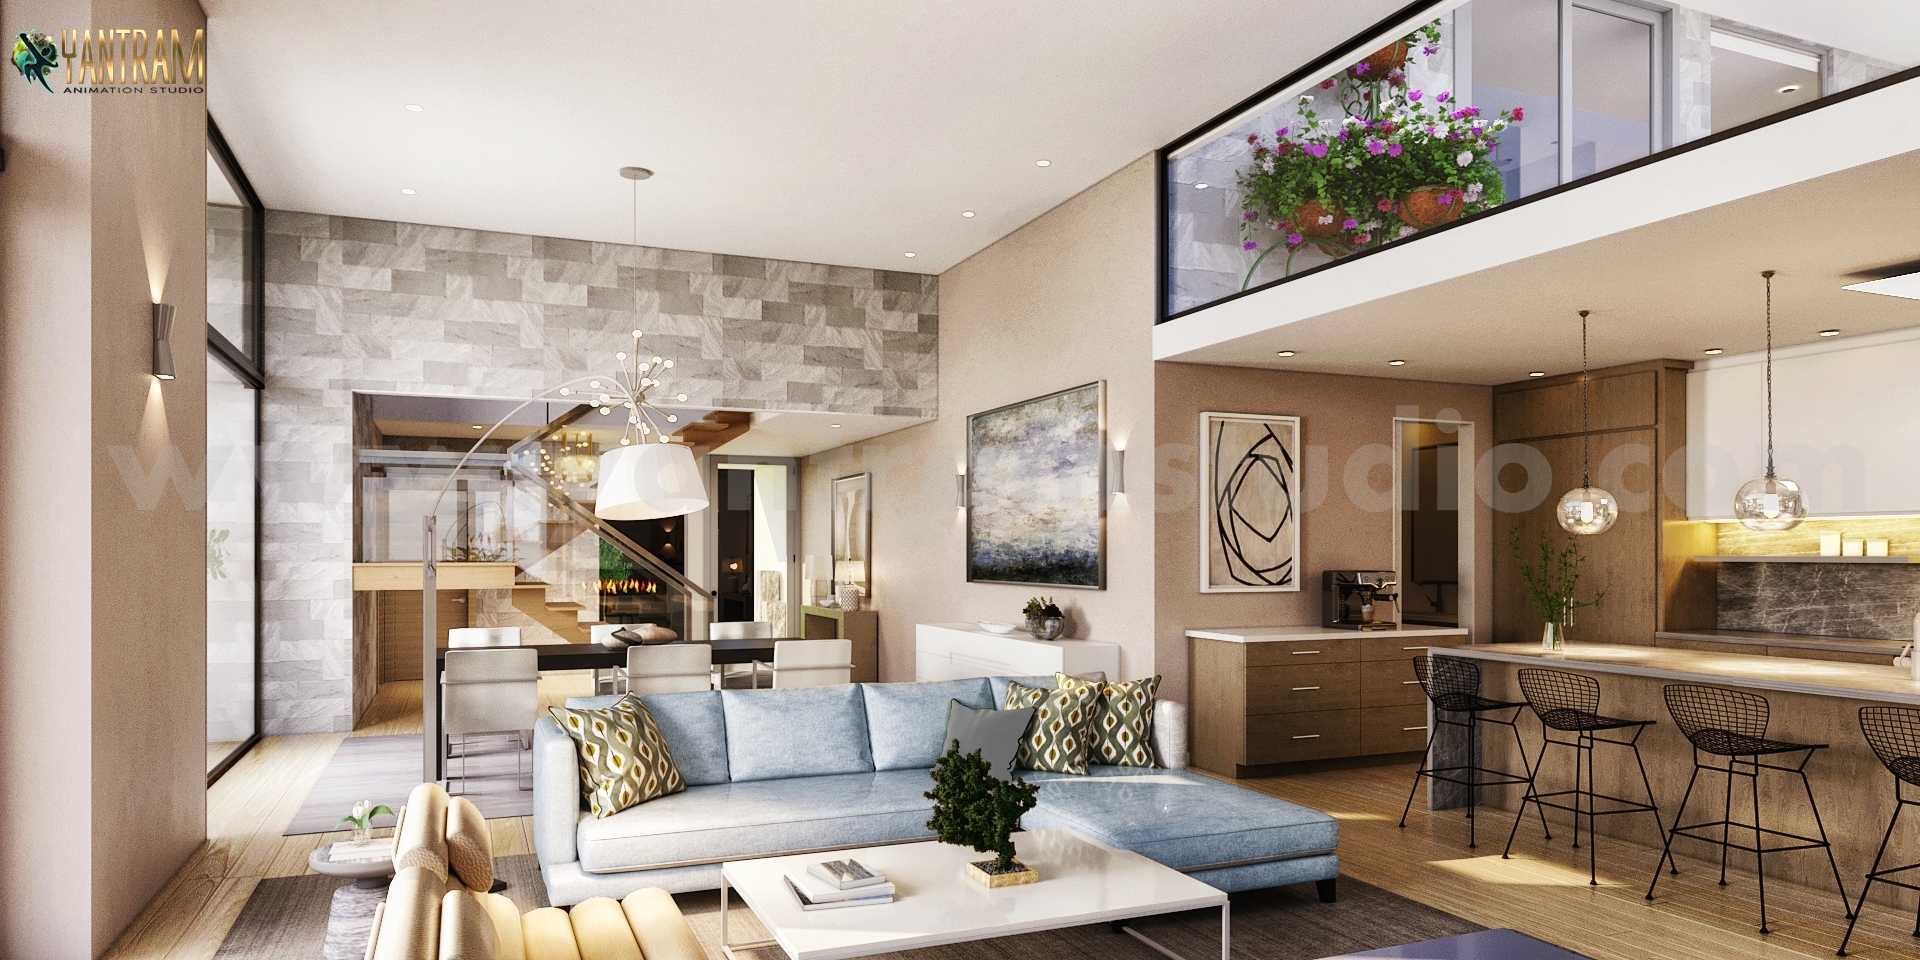 Modern & Innovative Residential living Area 3D Interior Modeling by Yantram 3d interior design firms, Moscow – Russia